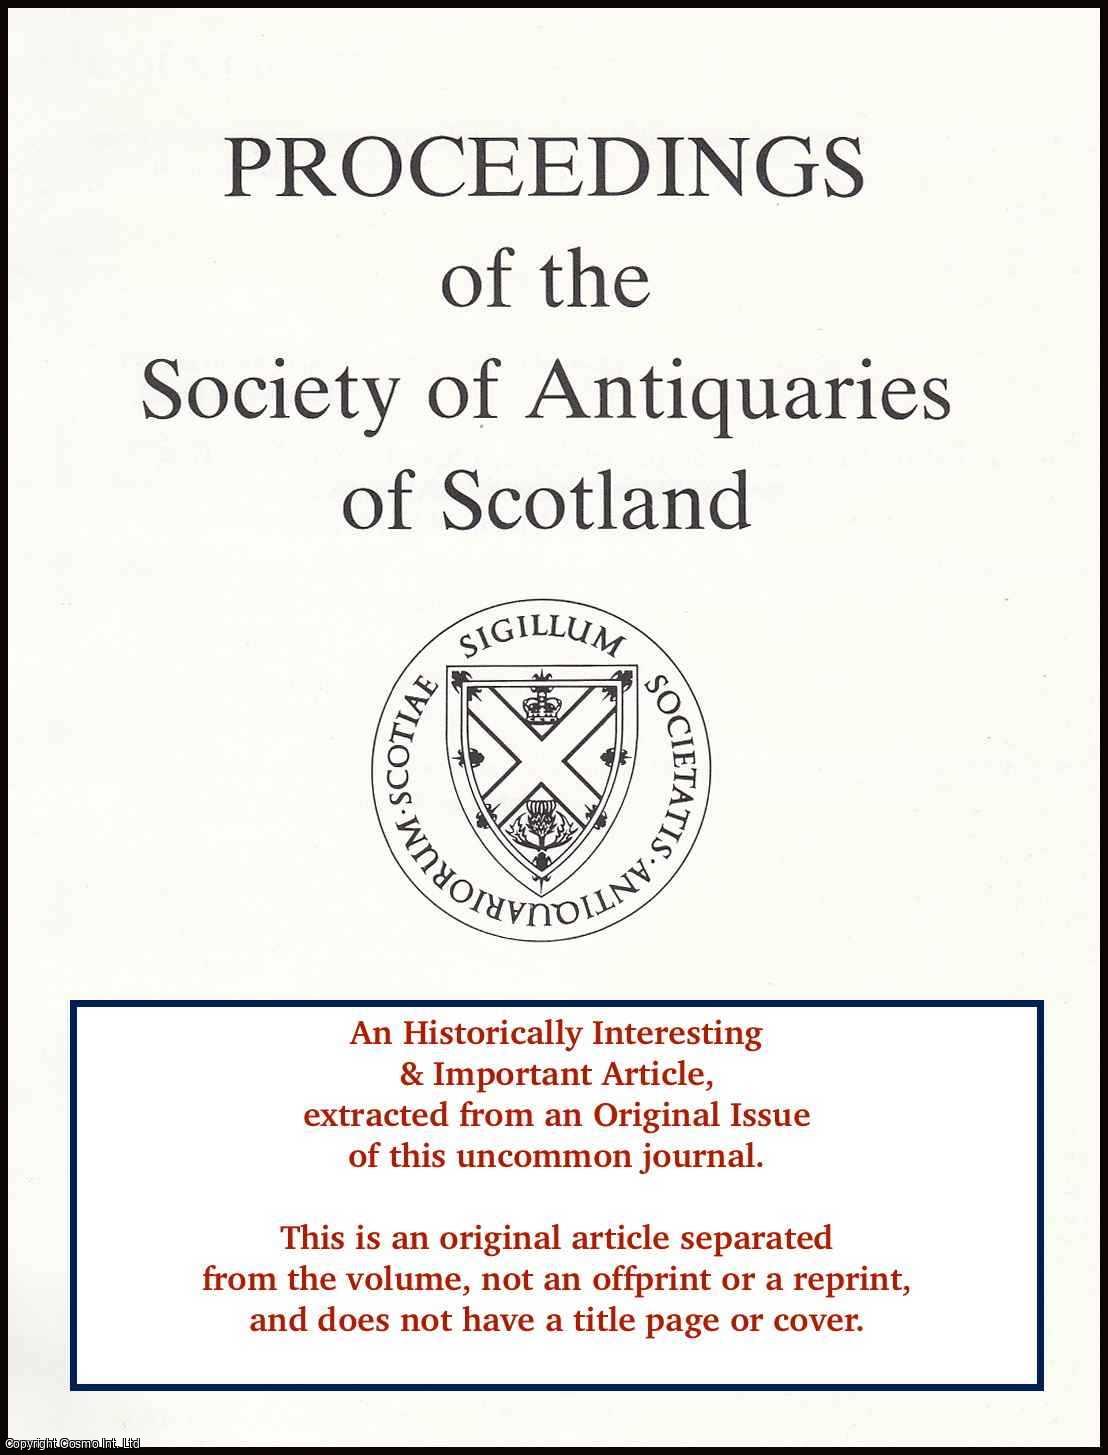 Nigel D. Melton - A Possible 17th Century Scottish Merchants' Booth at Eastshore, Dunrossness, Shetland. An original article from the Proceedings of the Society of Antiquaries of Scotland, 2004.